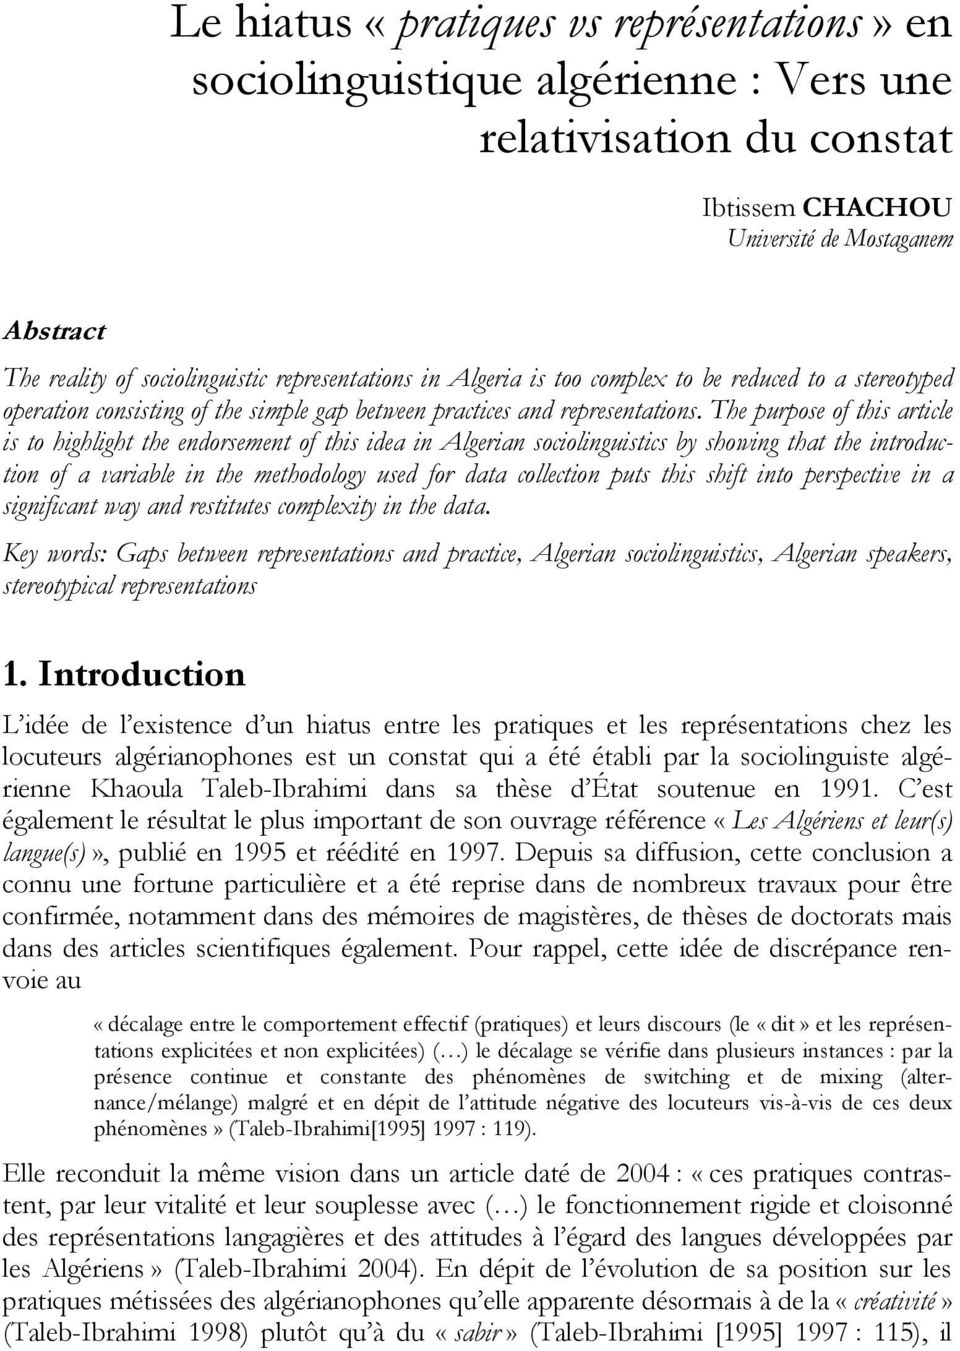 The purpose of this article is to highlight the endorsement of this idea in Algerian sociolinguistics by showing that the introduction of a variable in the methodology used for data collection puts